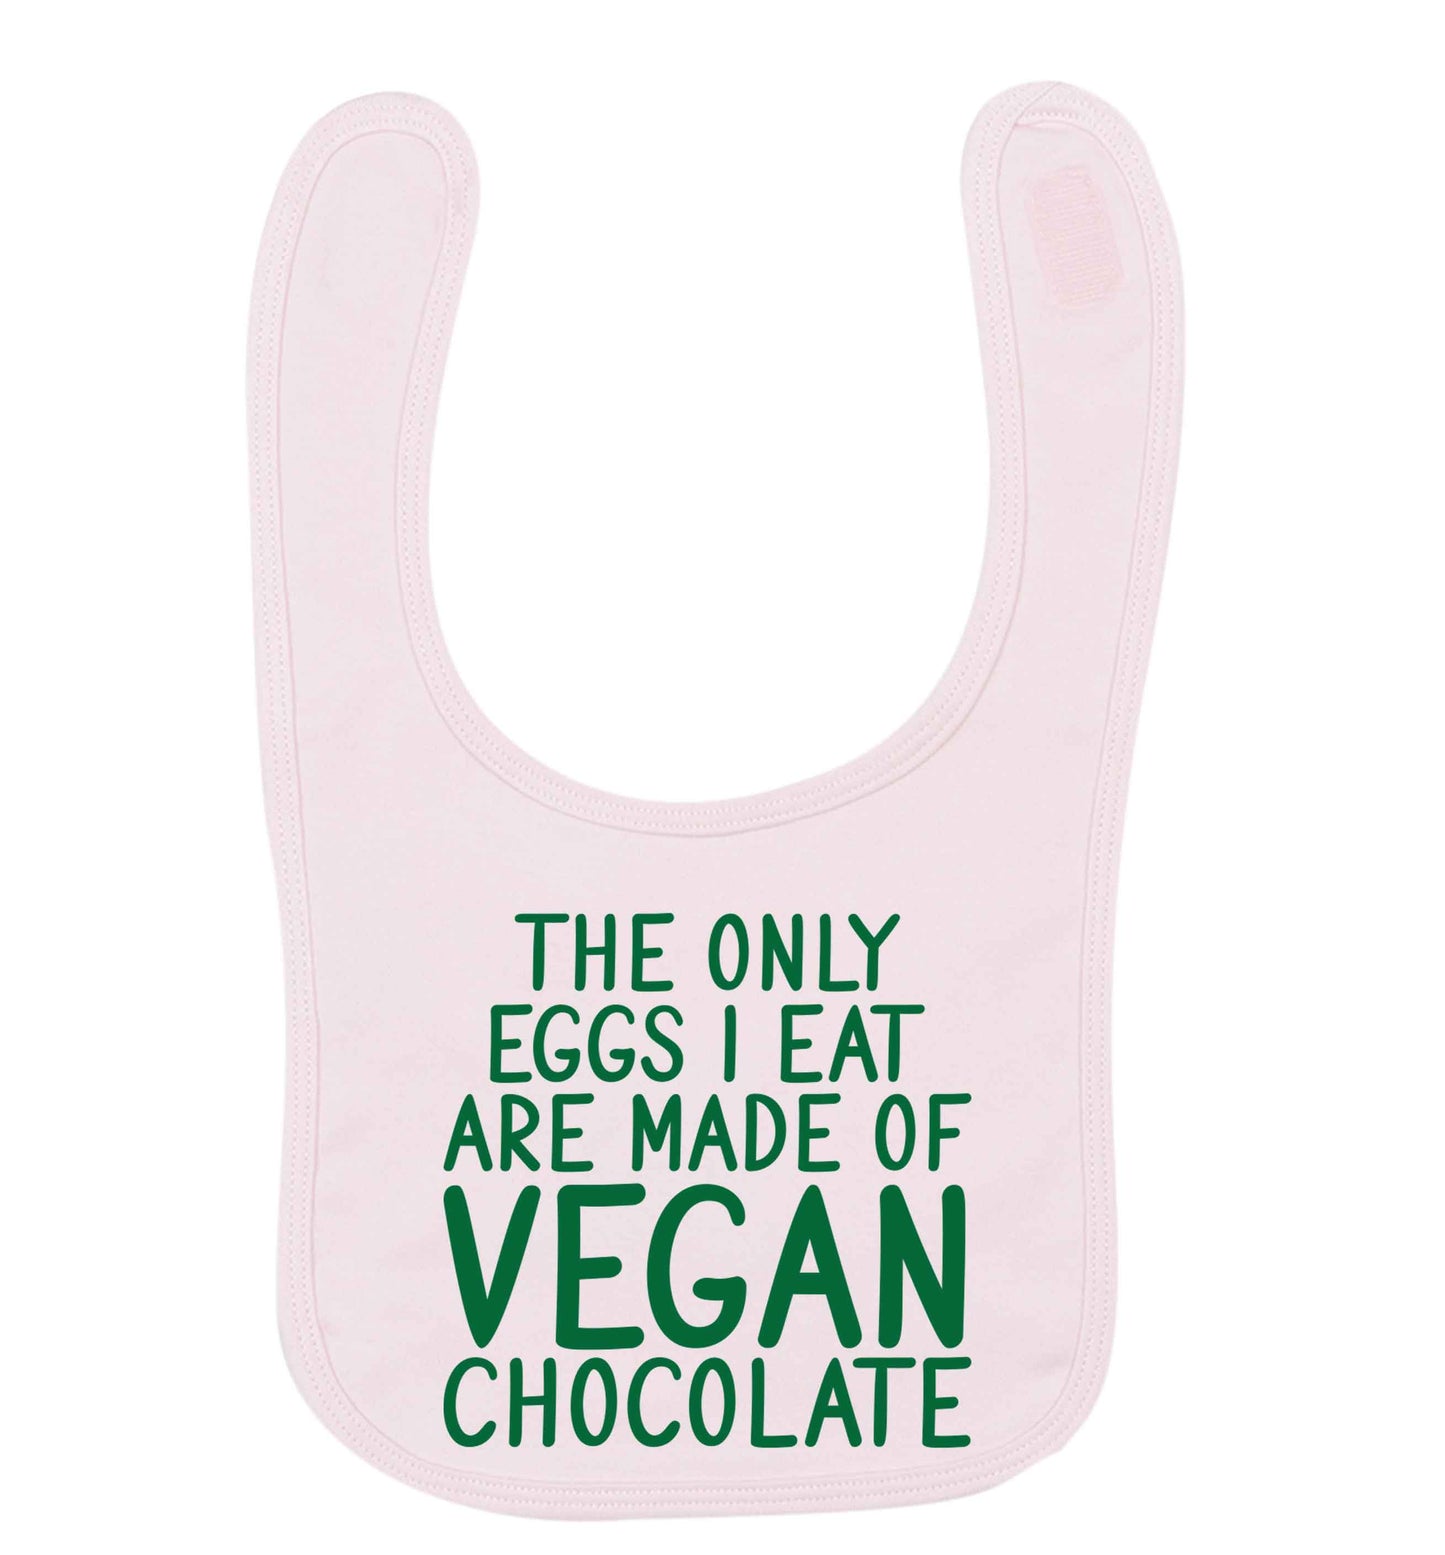 The only eggs I eat are made of vegan chocolate pale pink baby bib